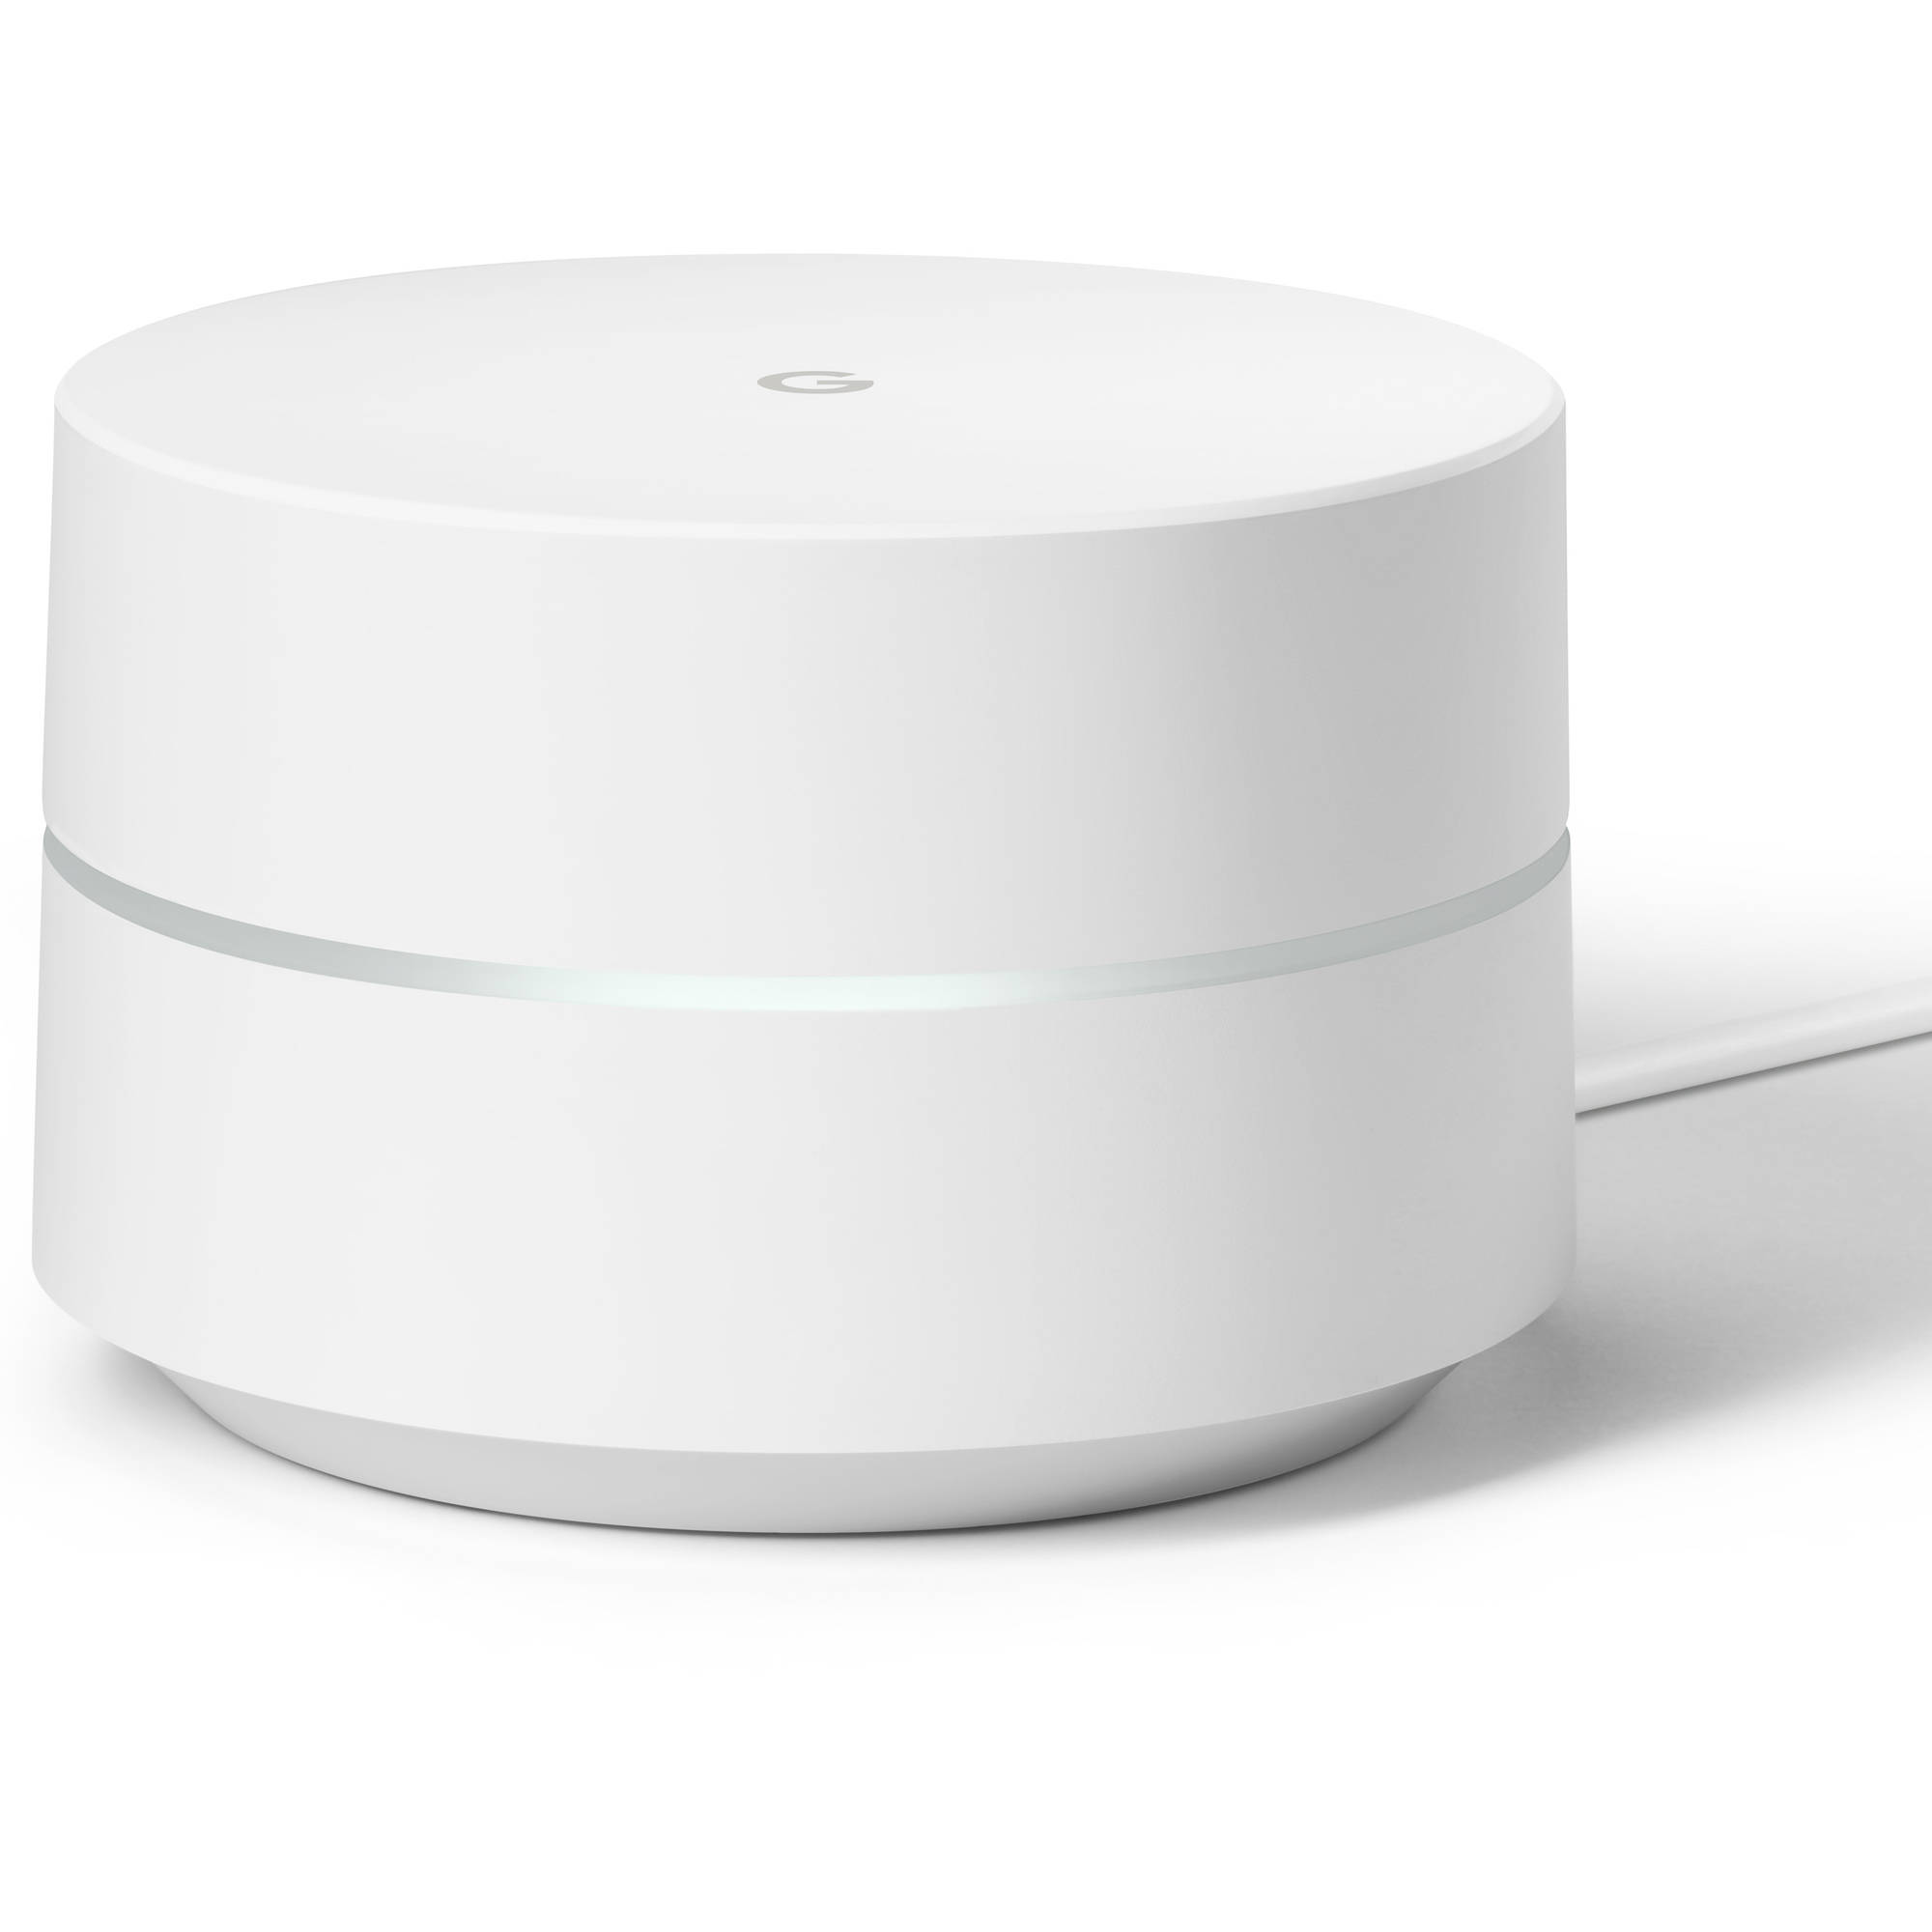 Google Wifi - 1 Pack - Mesh Router Wifi, White - image 4 of 4